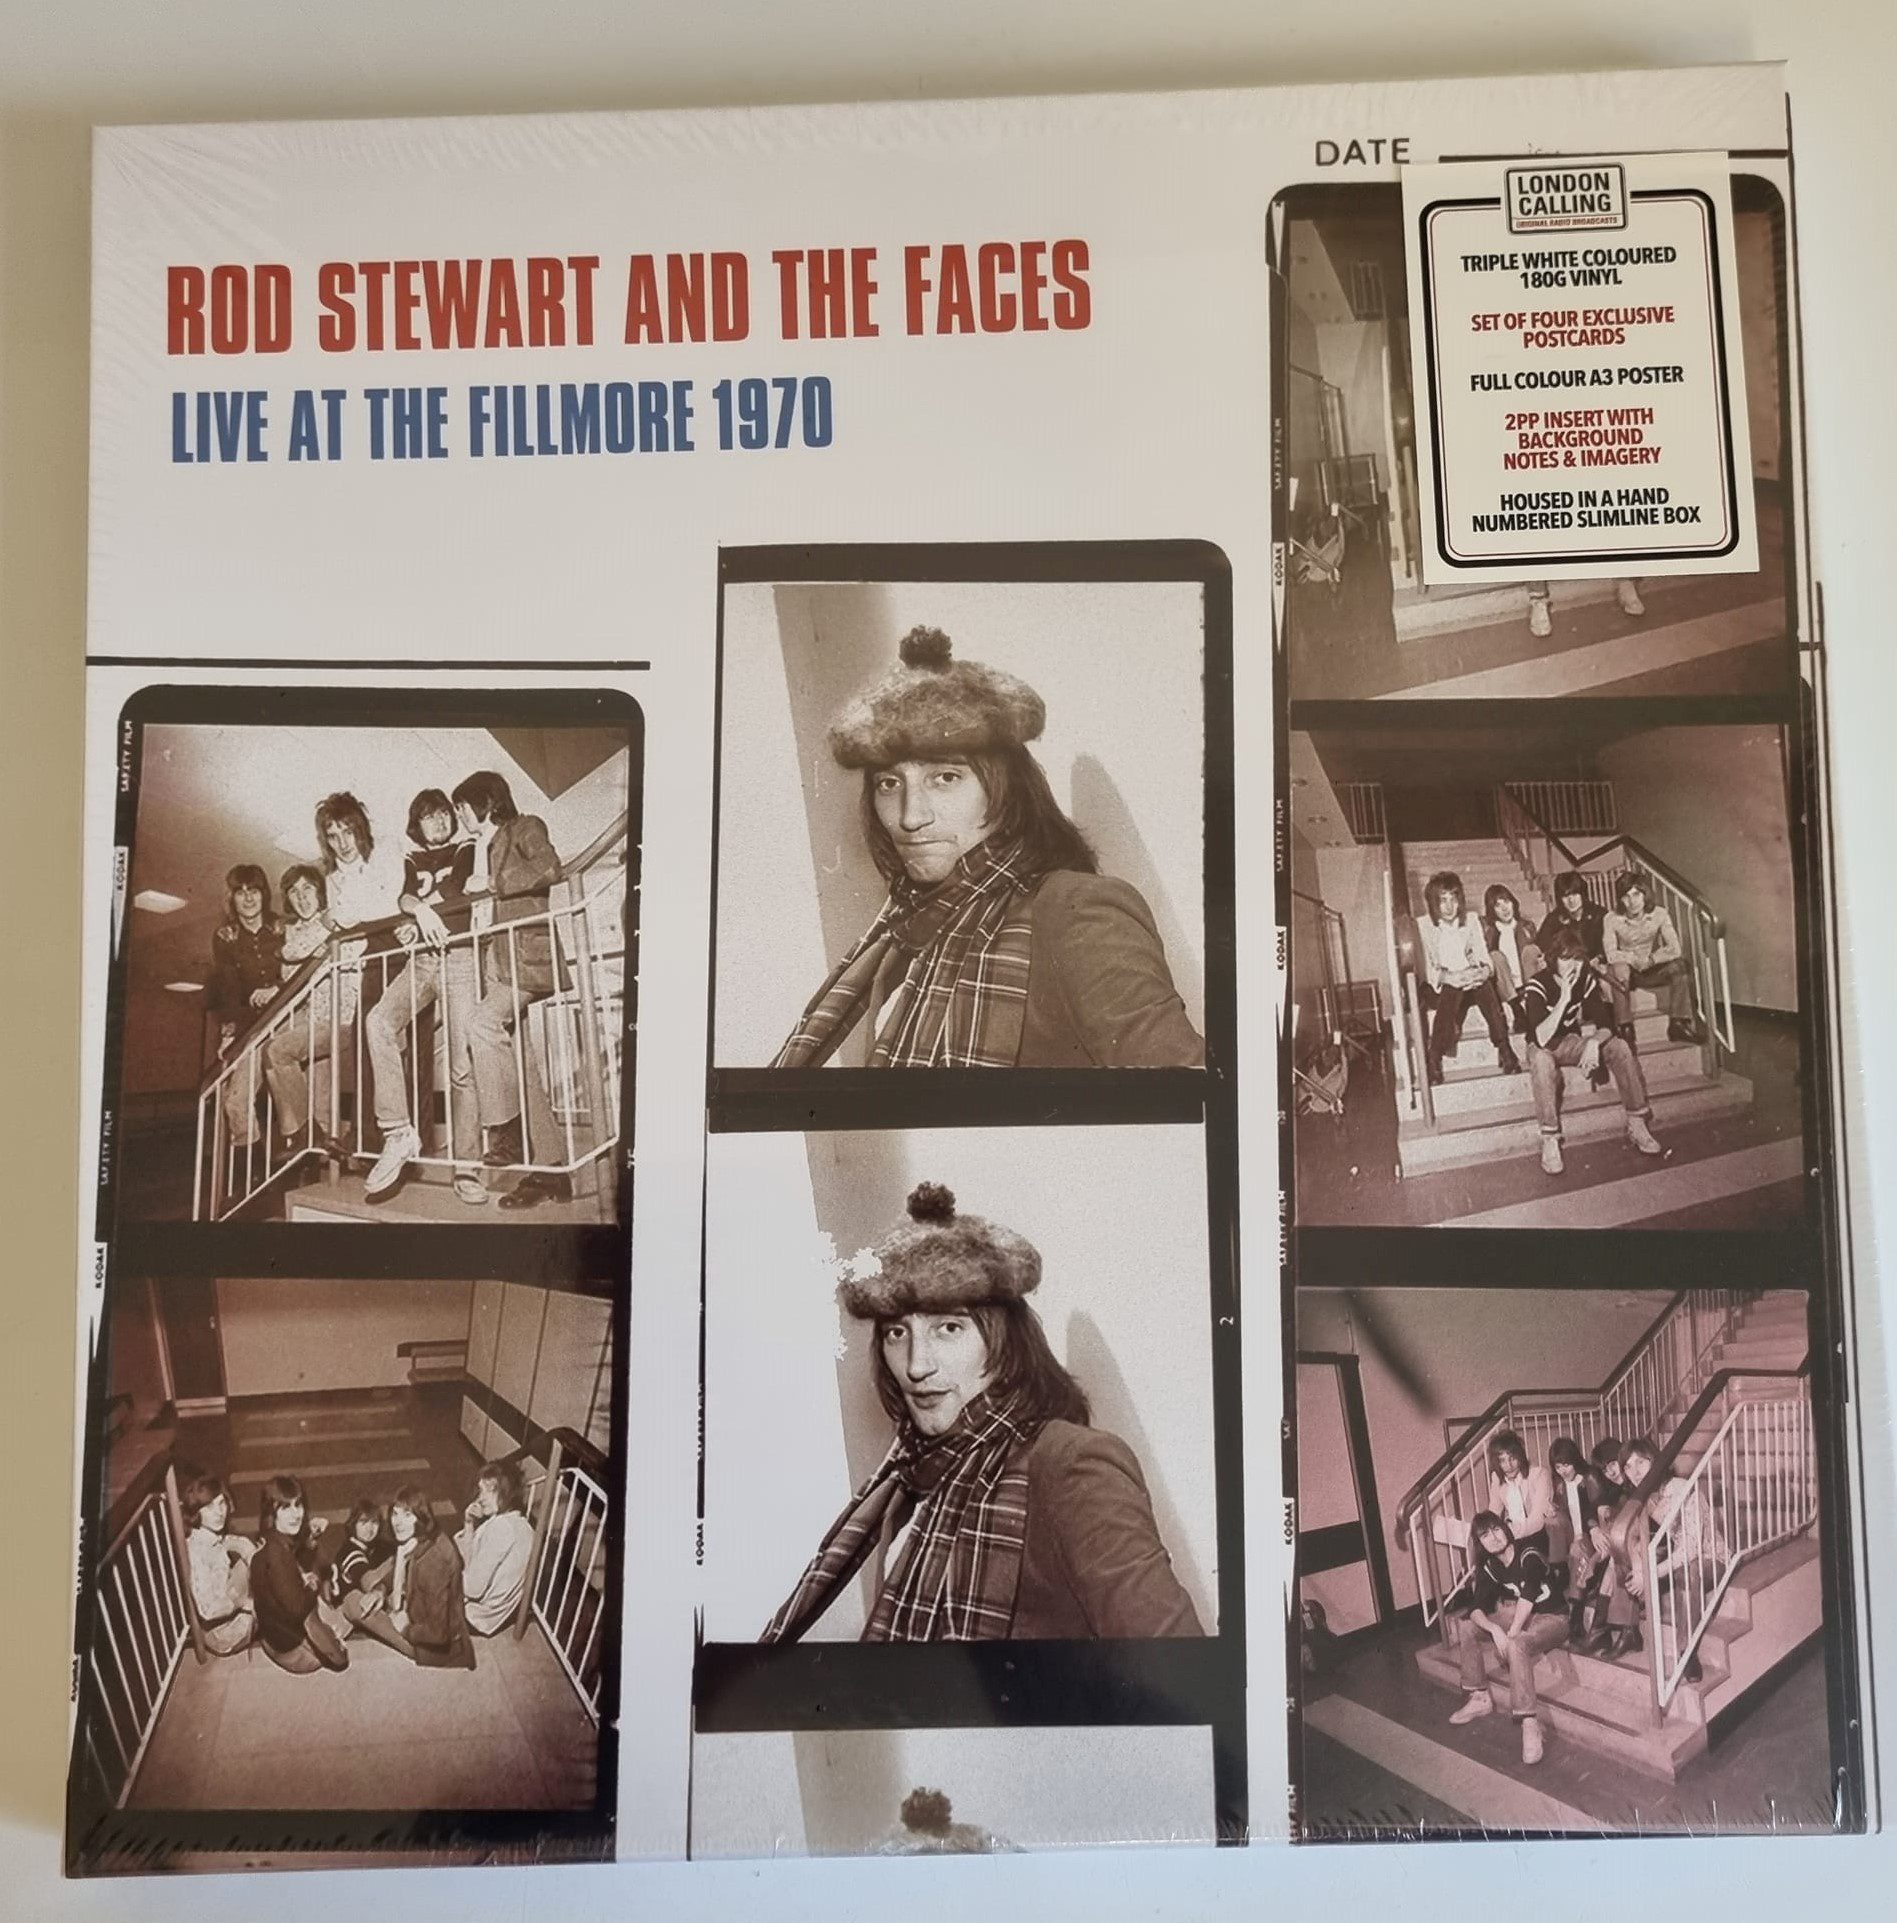 Buy this rare Rod Stewart And Faces Box Set by clicking here